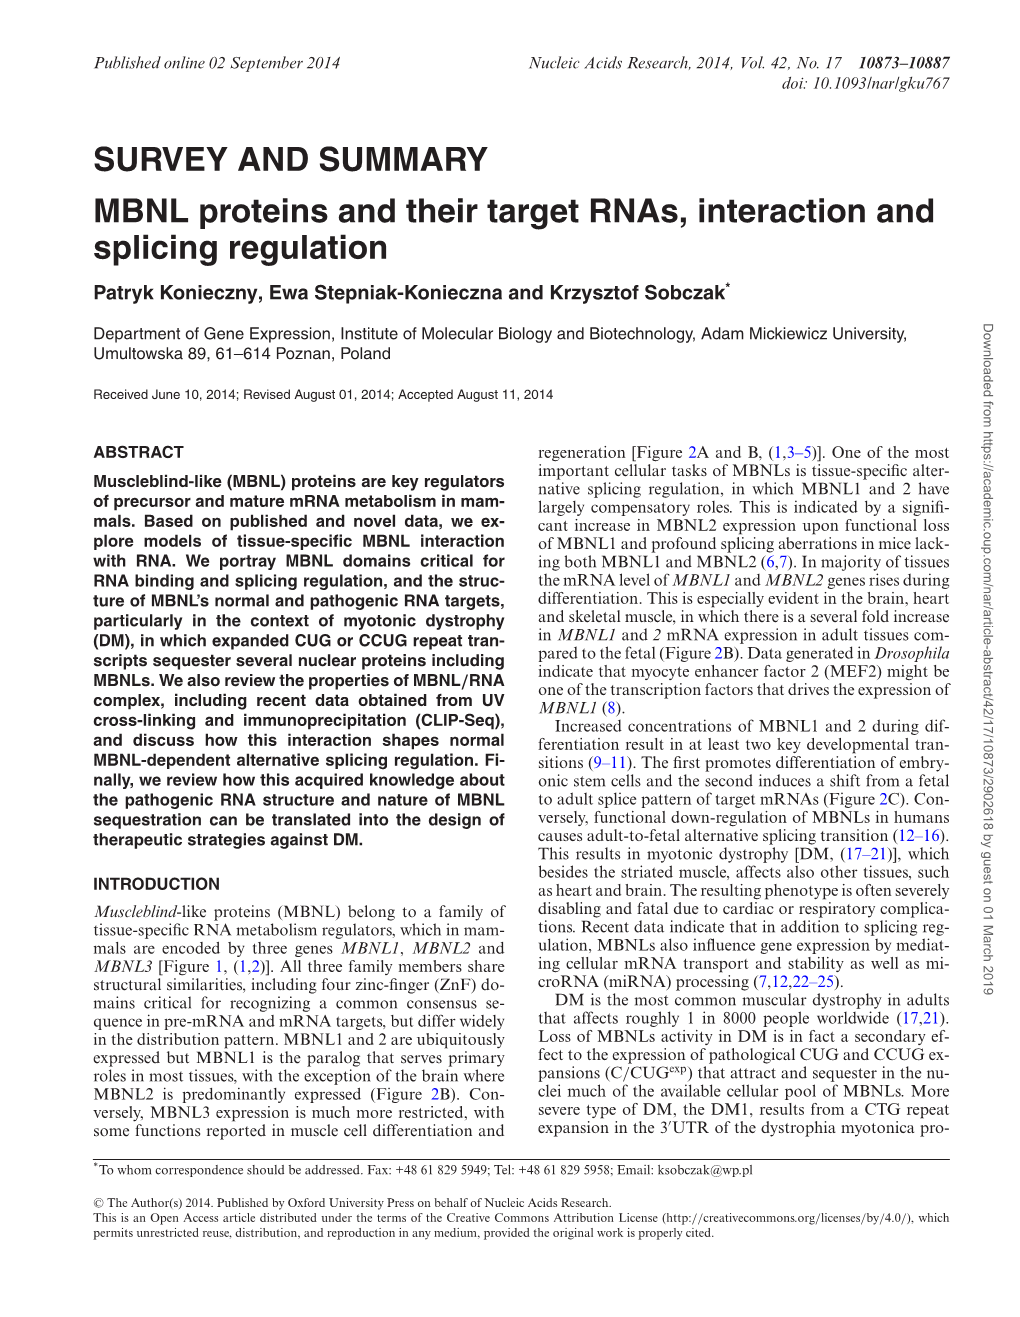 SURVEY and SUMMARY MBNL Proteins and Their Target Rnas